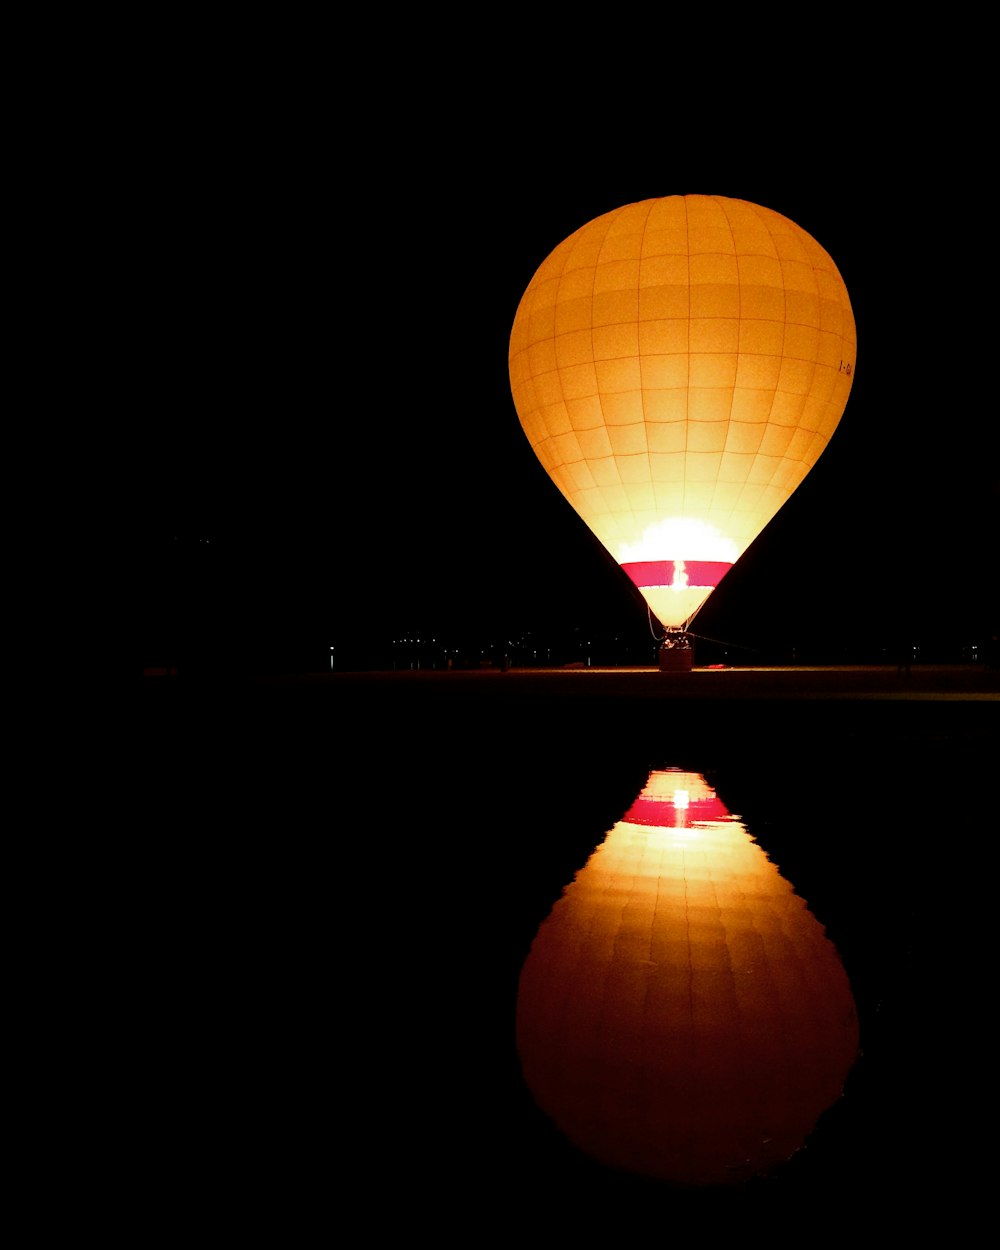 photography of brown and white hot air balloon at nighttime